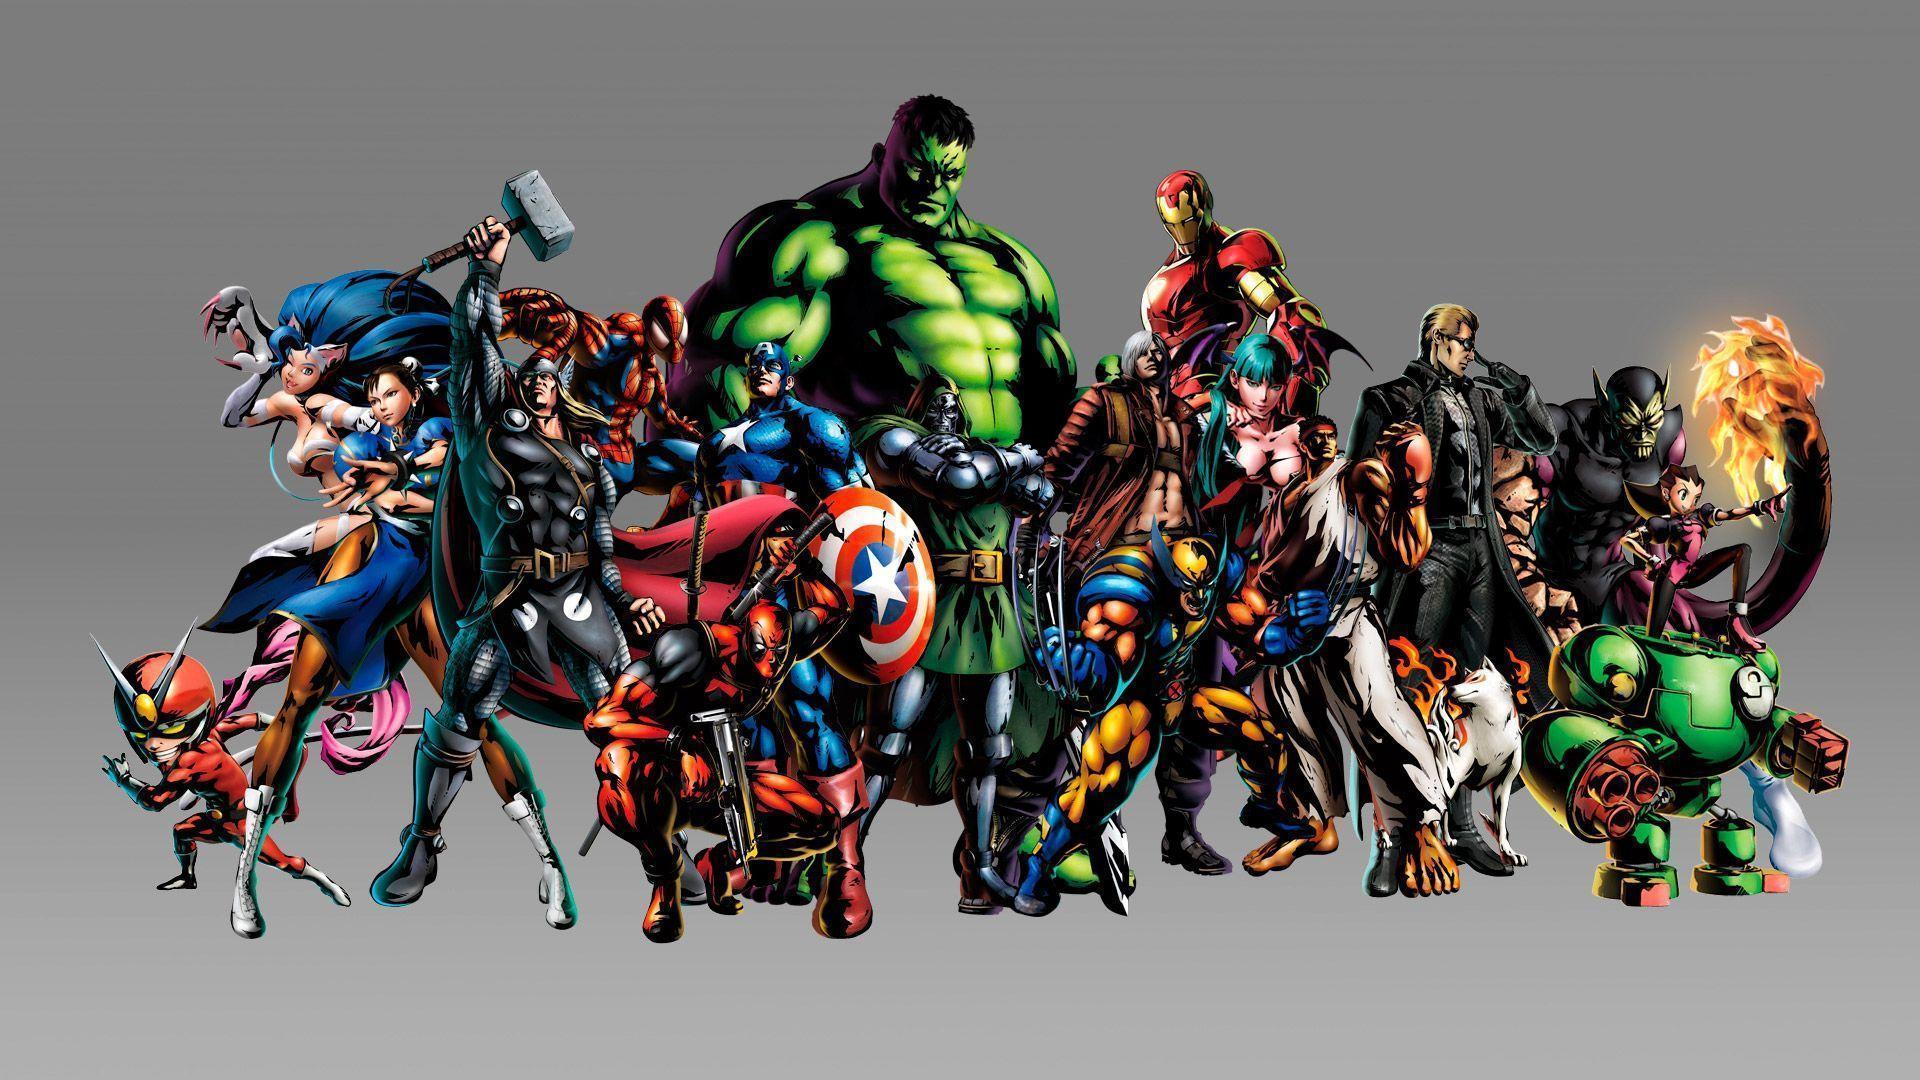 Marvel HD Wallpaper 1080p for PC and Laptop